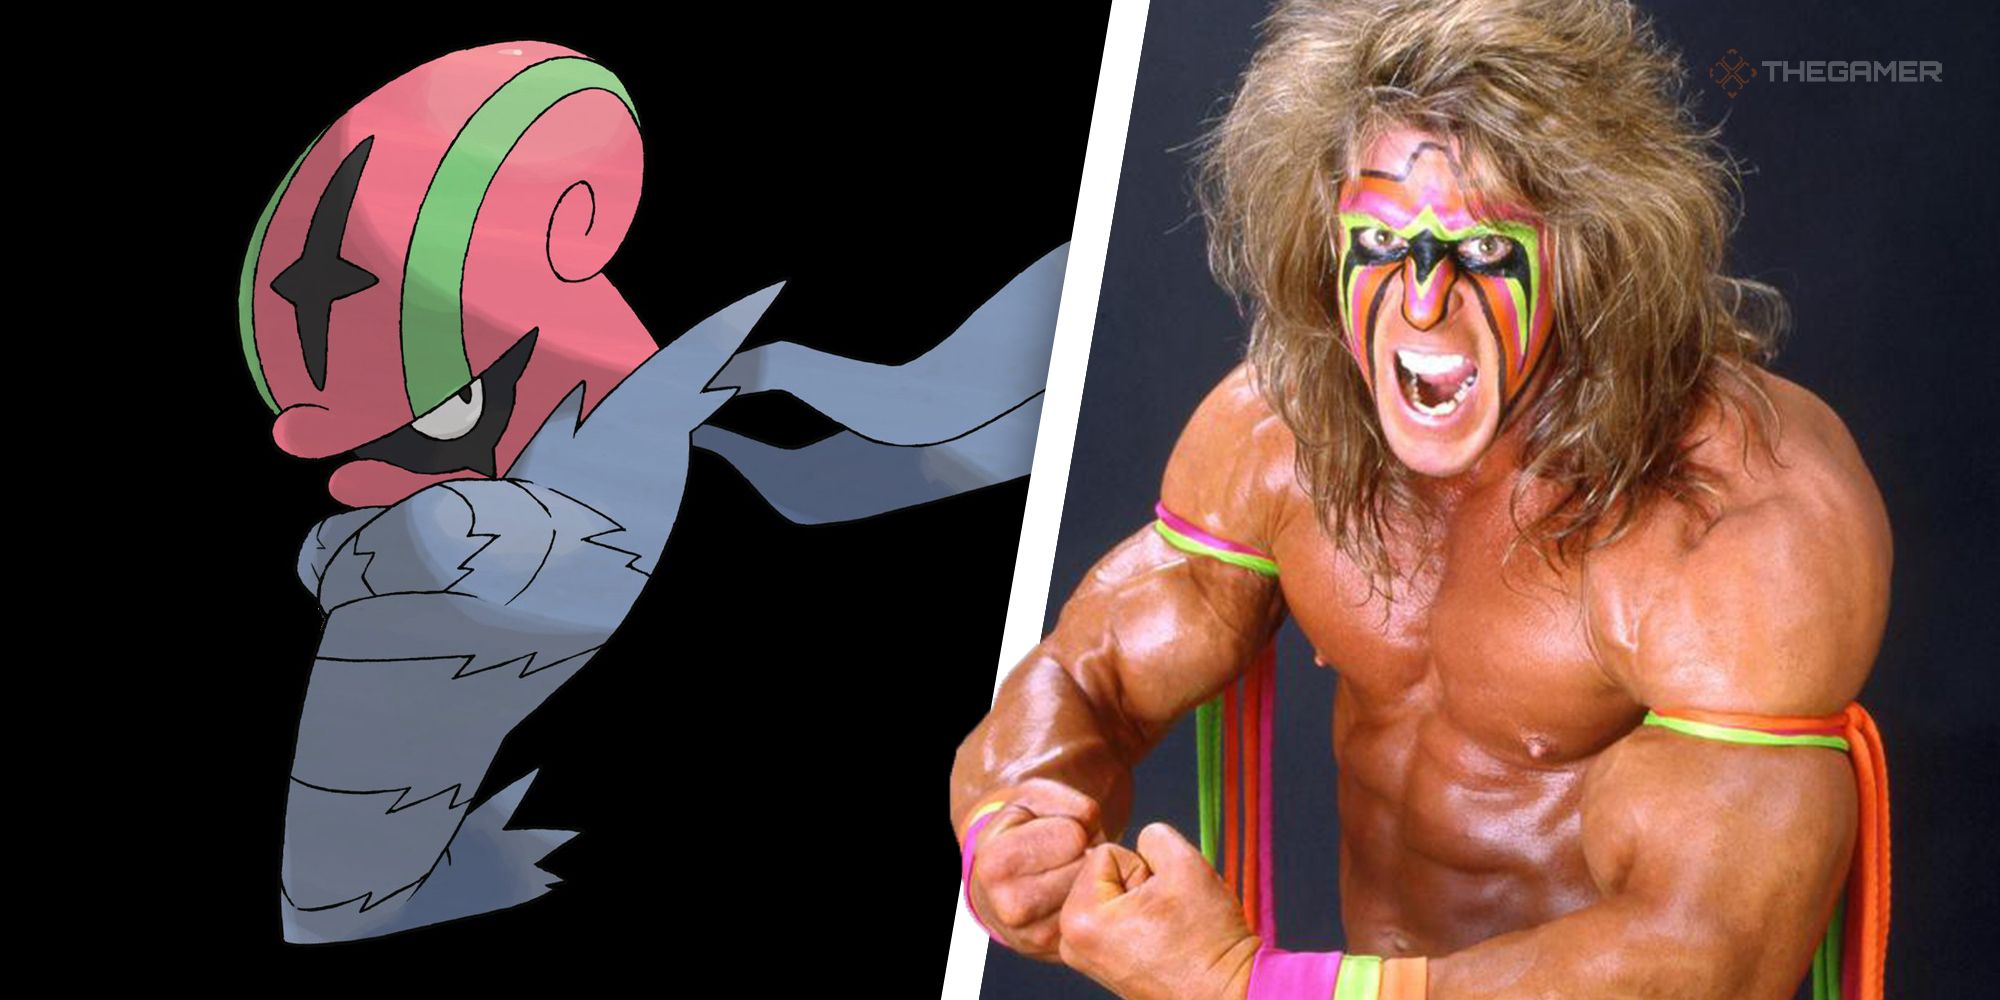 Heres 30 Wrestlers As Pokemon For The Royal Rumble (31)